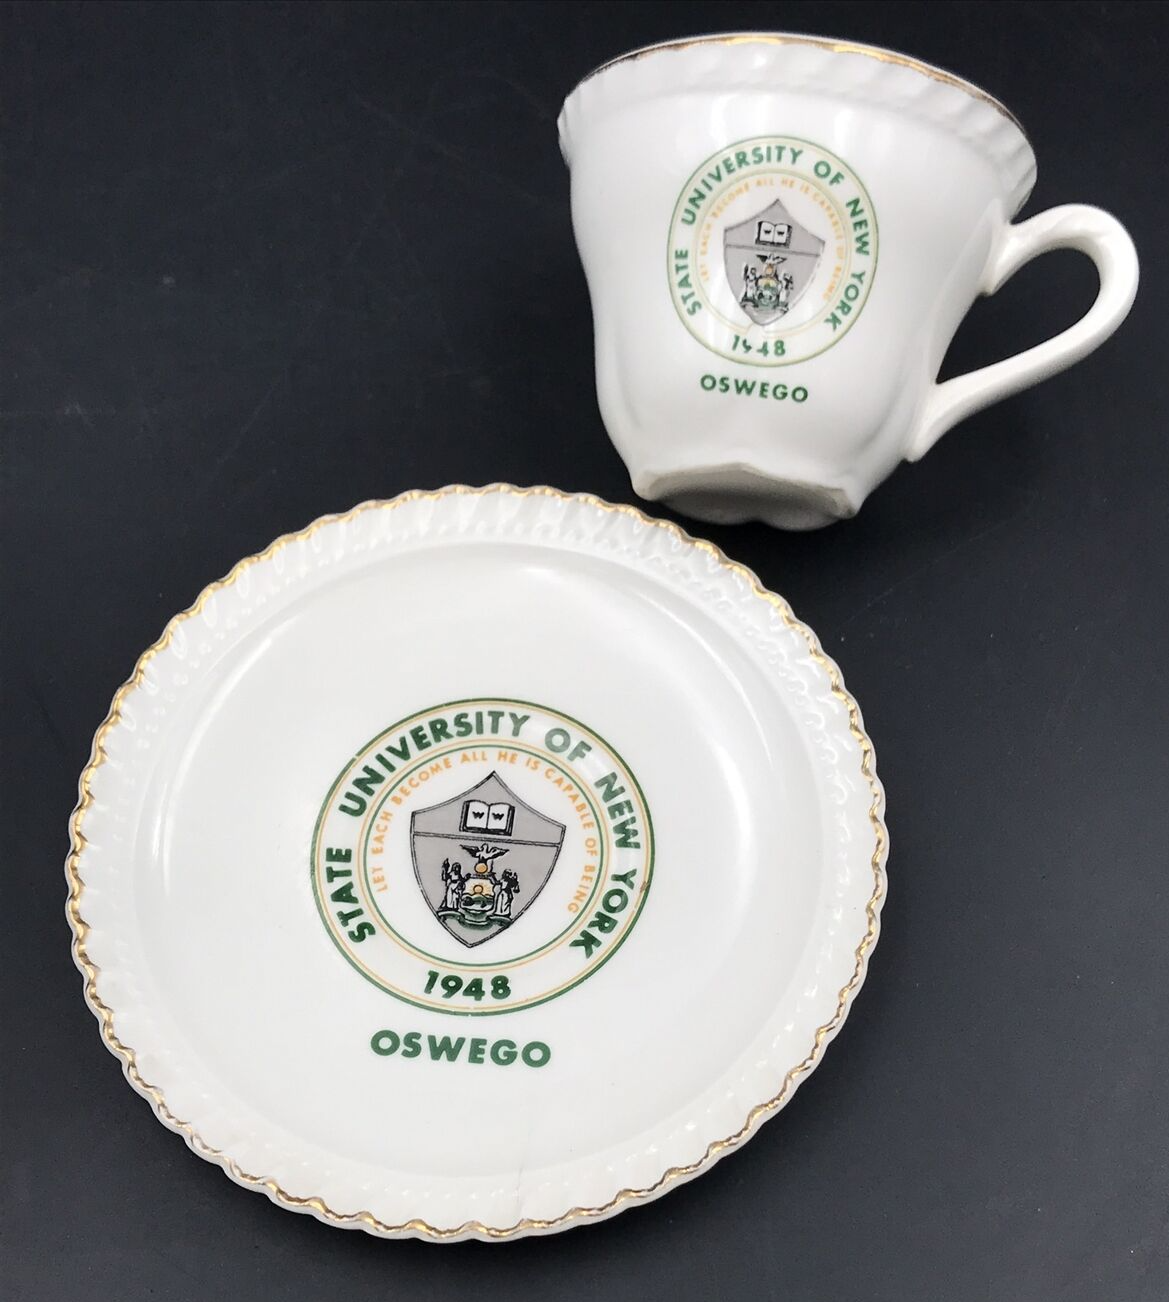 Primary image for VTG 1948 State University of New York Oswego Crest Tea Cup & Saucer w/ Gold Rim